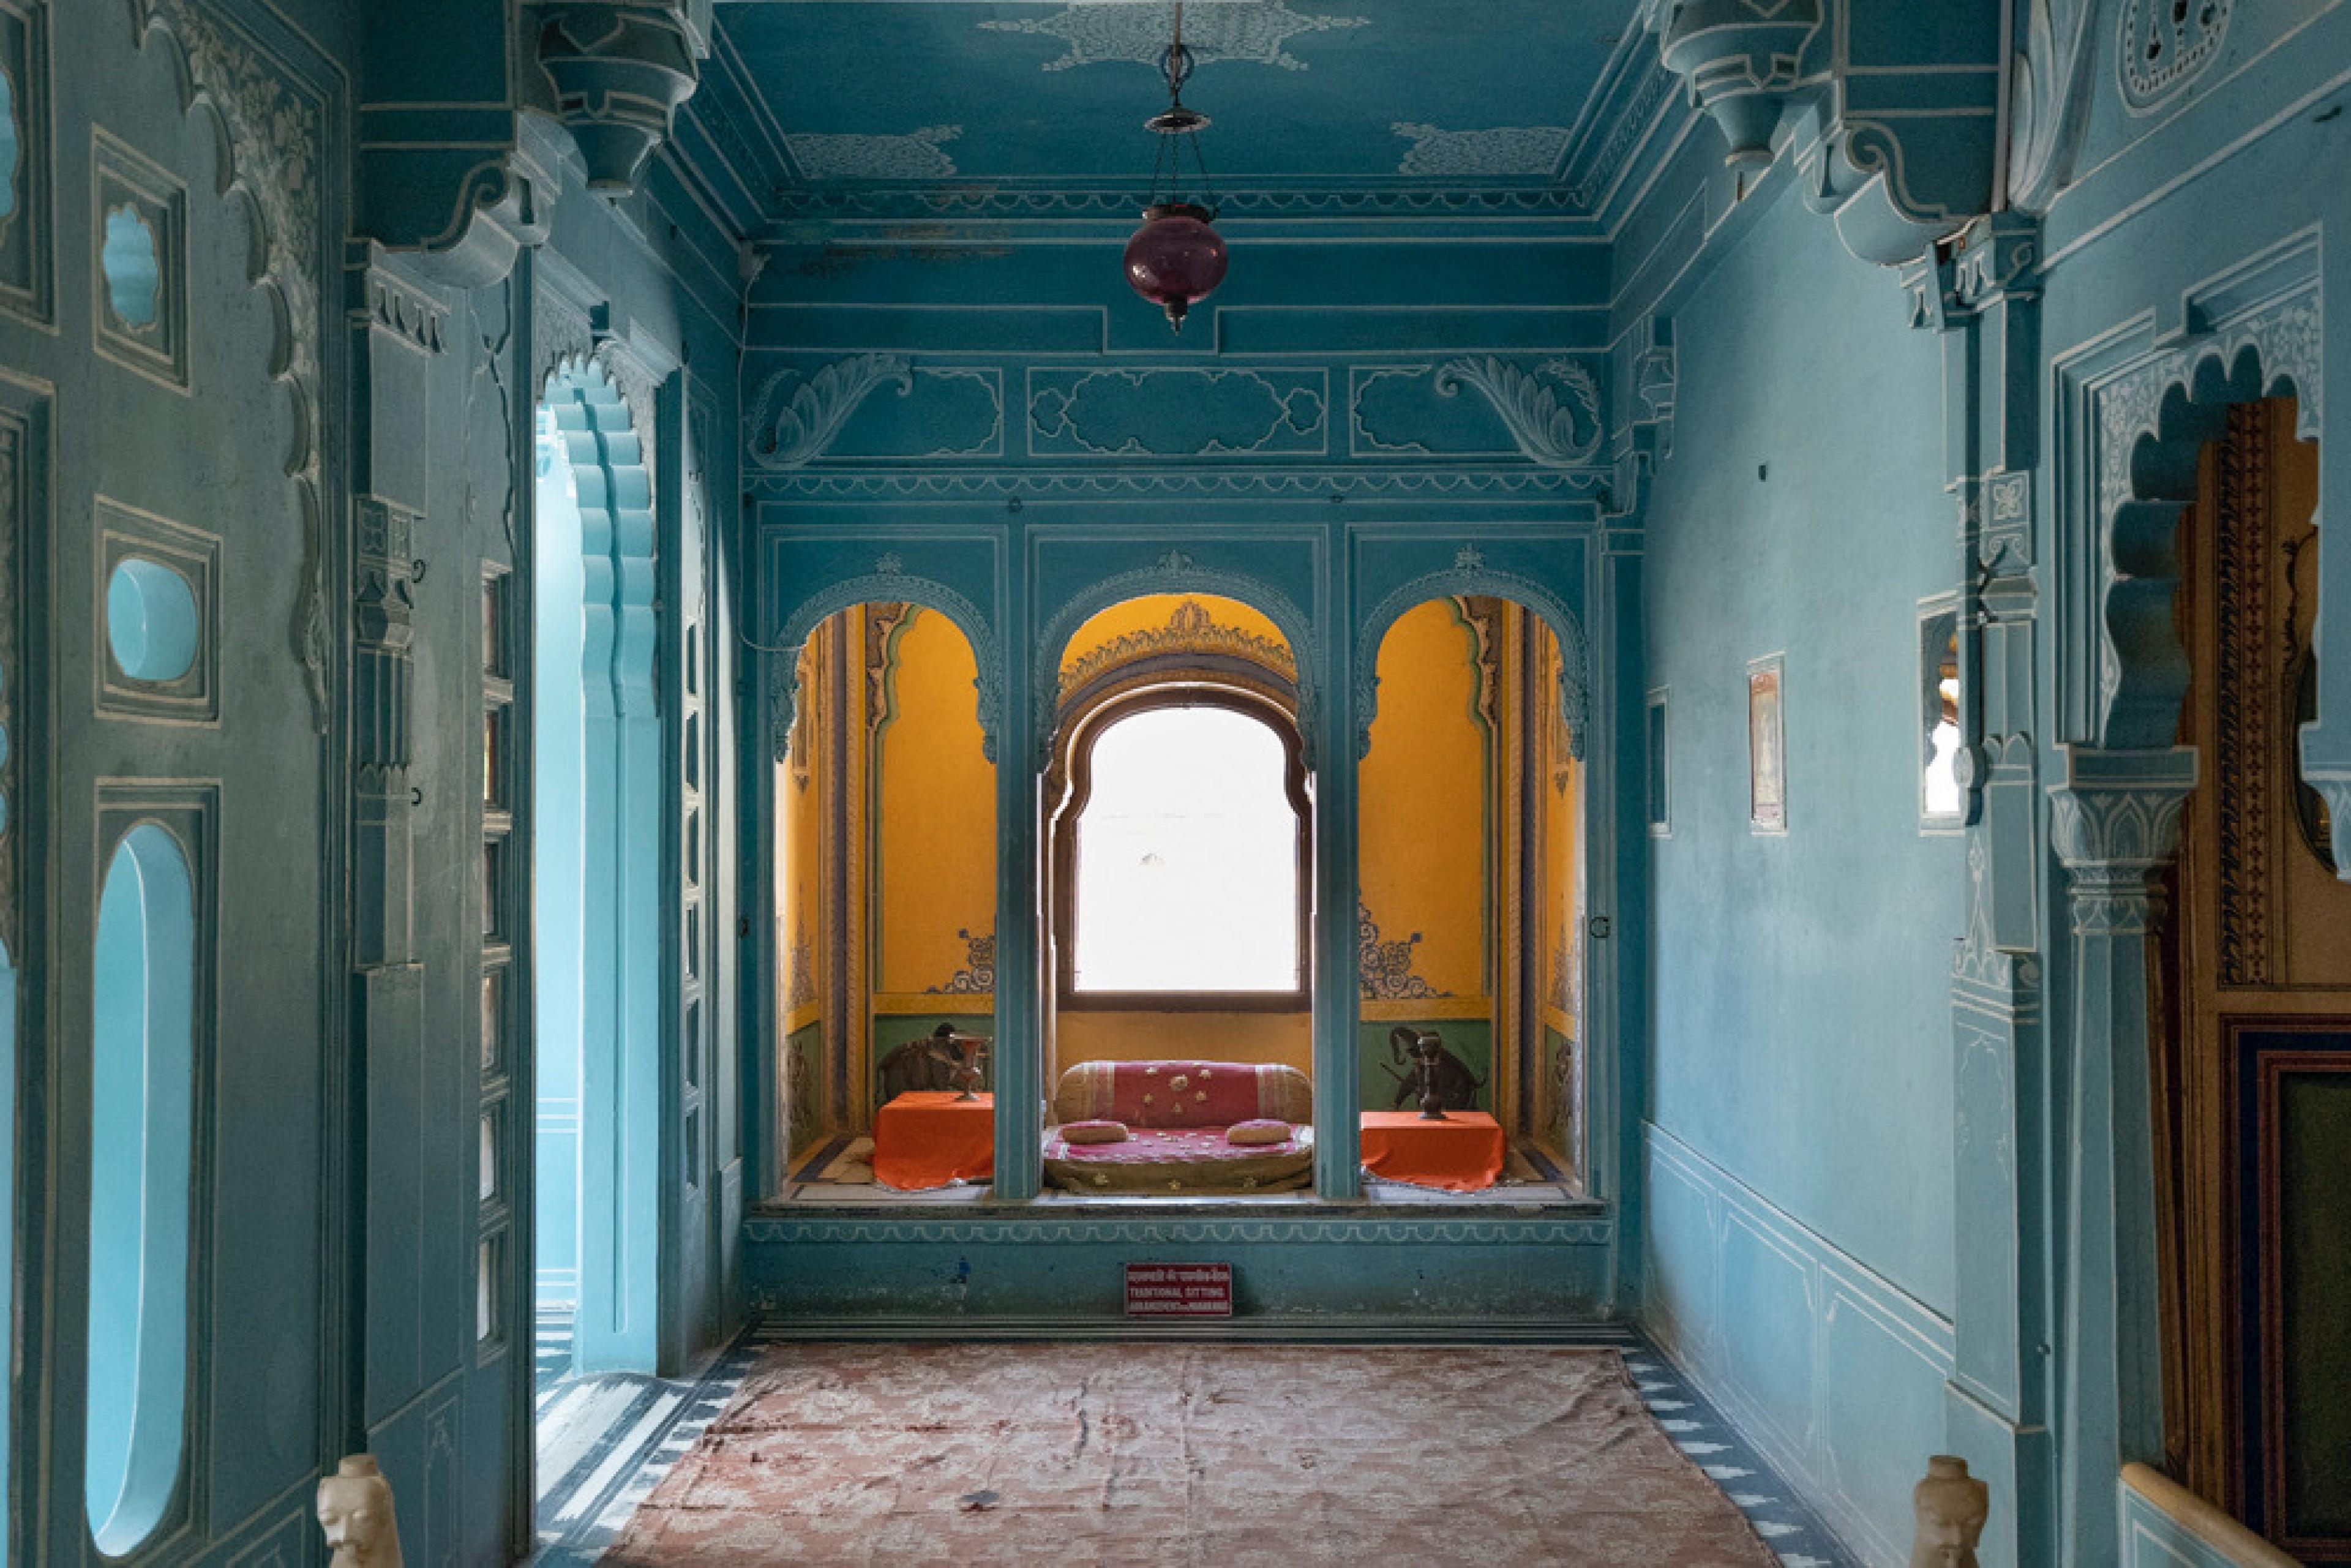 Zenana Mahal or queen's chambers , City Palace, Udaipur, Rajasthan, India